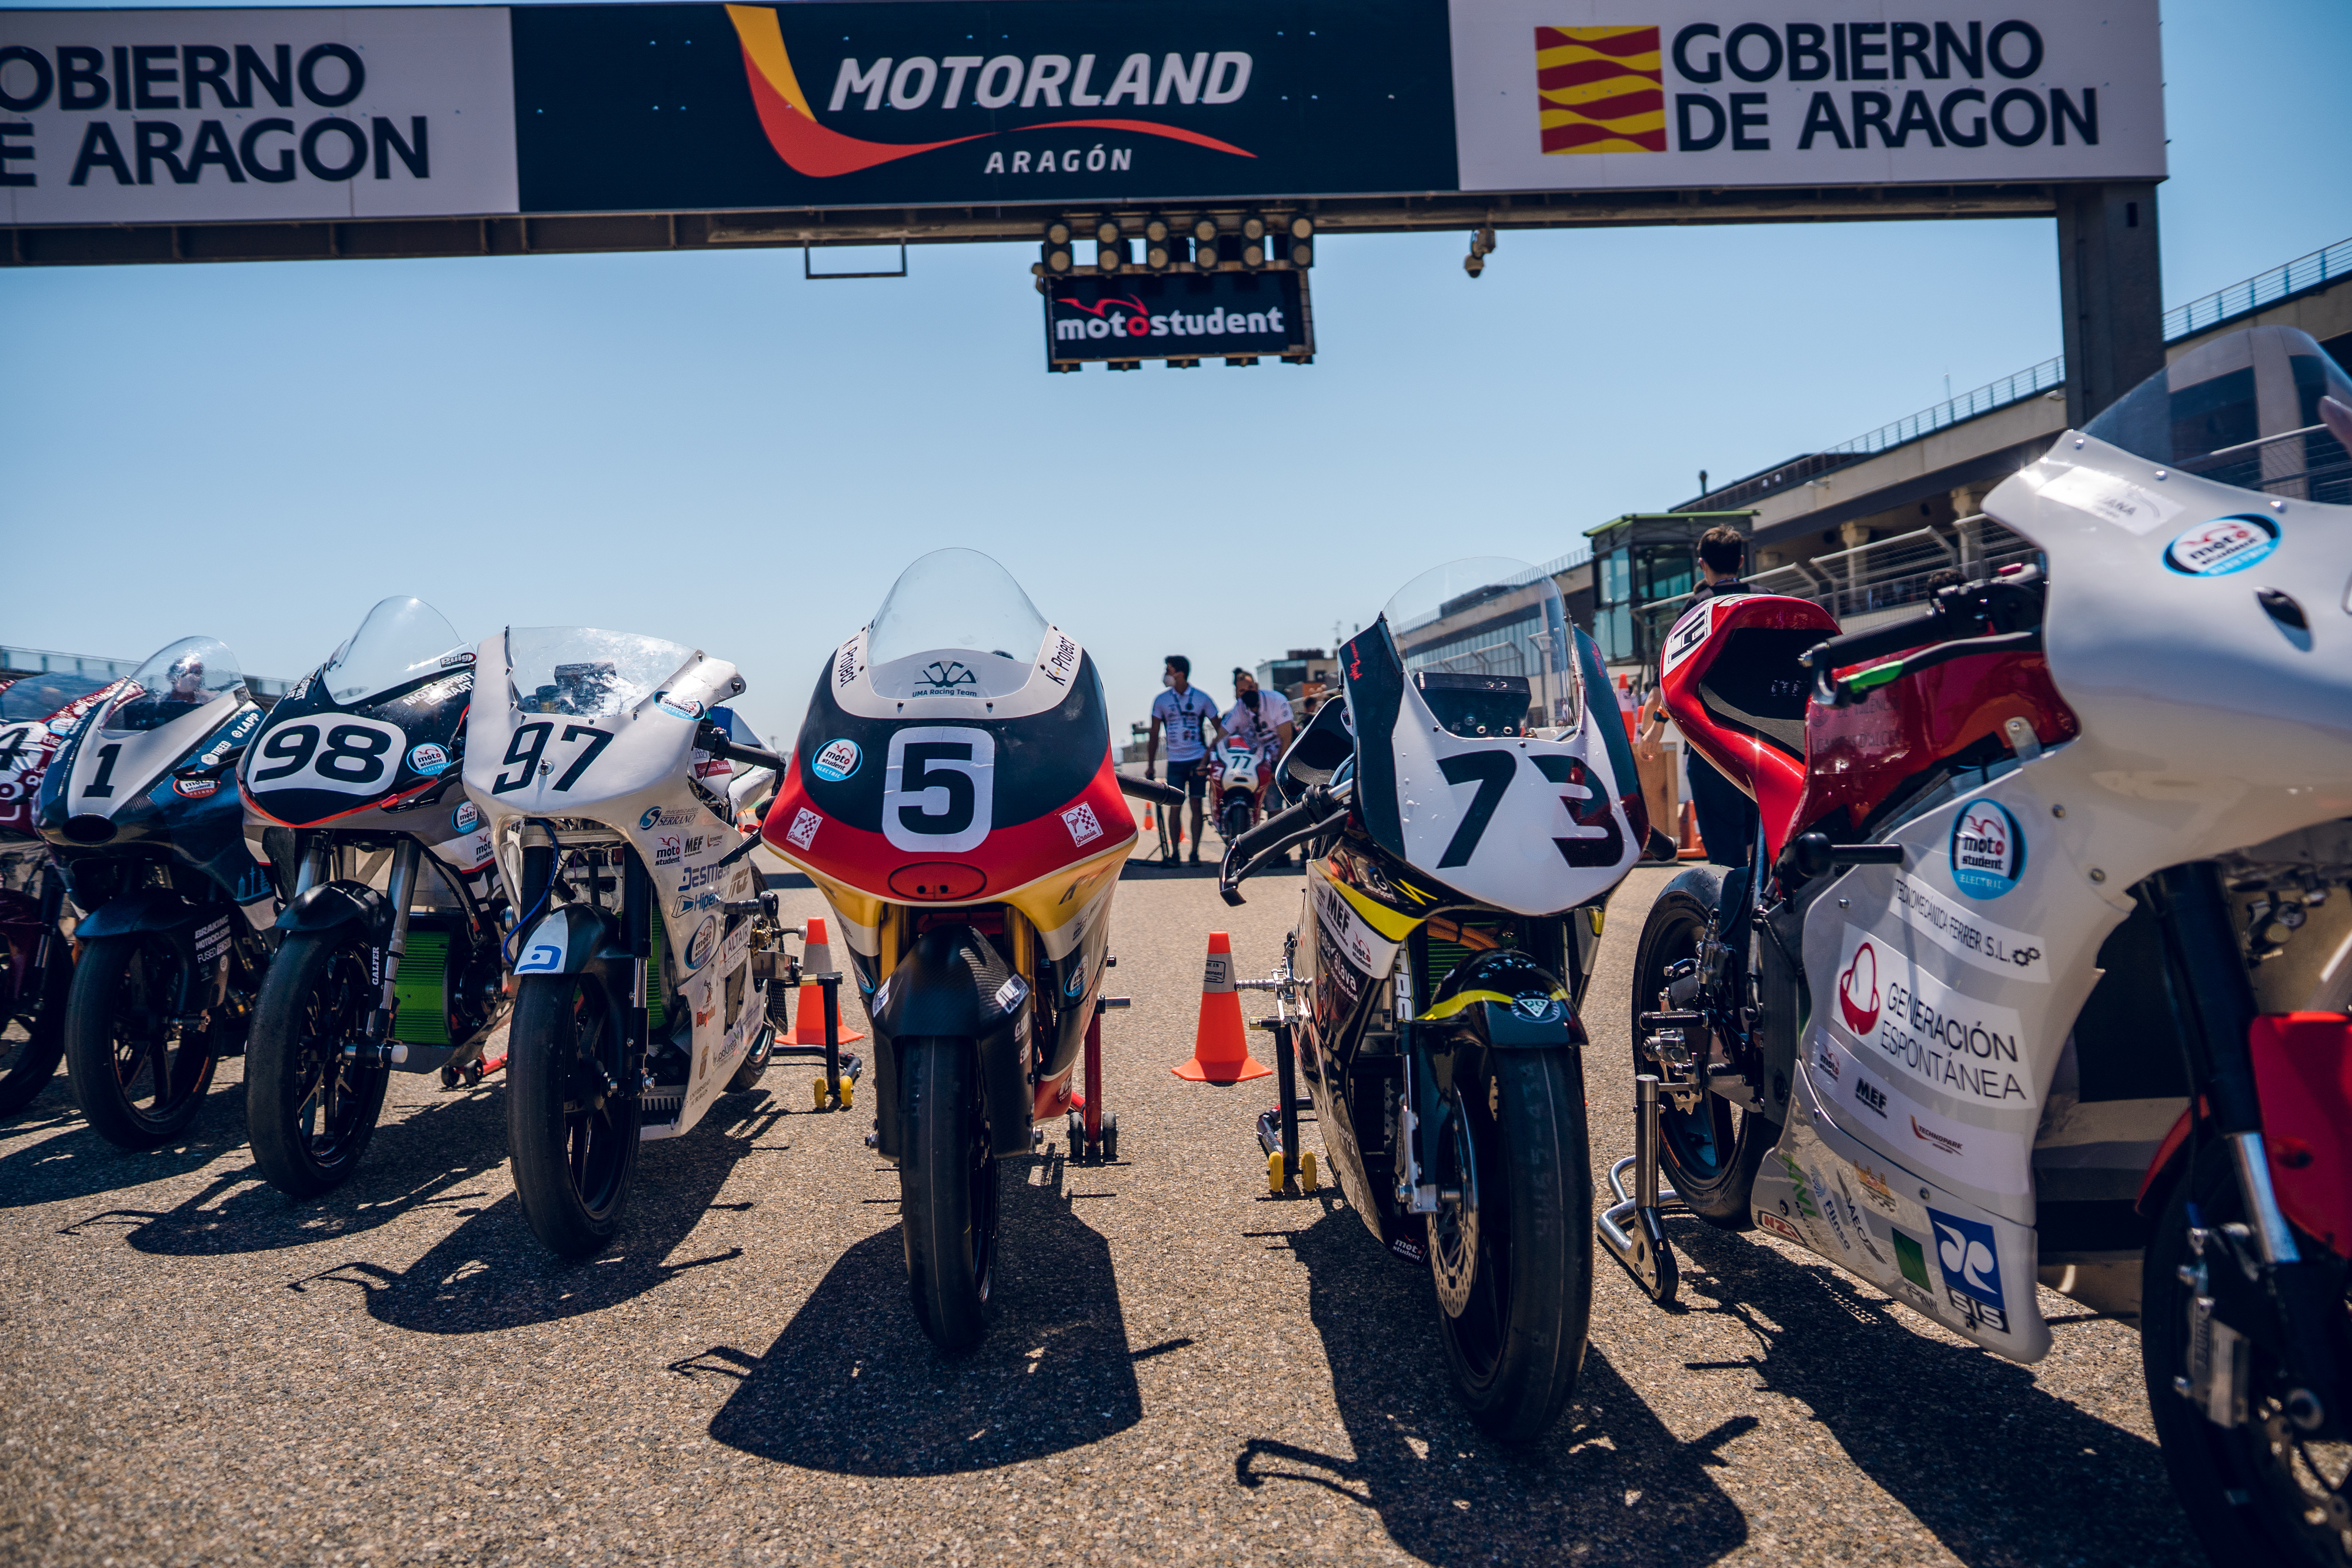 The date has arrived: the 7th Edition of MotoStudent begins at MotorLand Aragón with 80 universities from 19 countries and 4 con